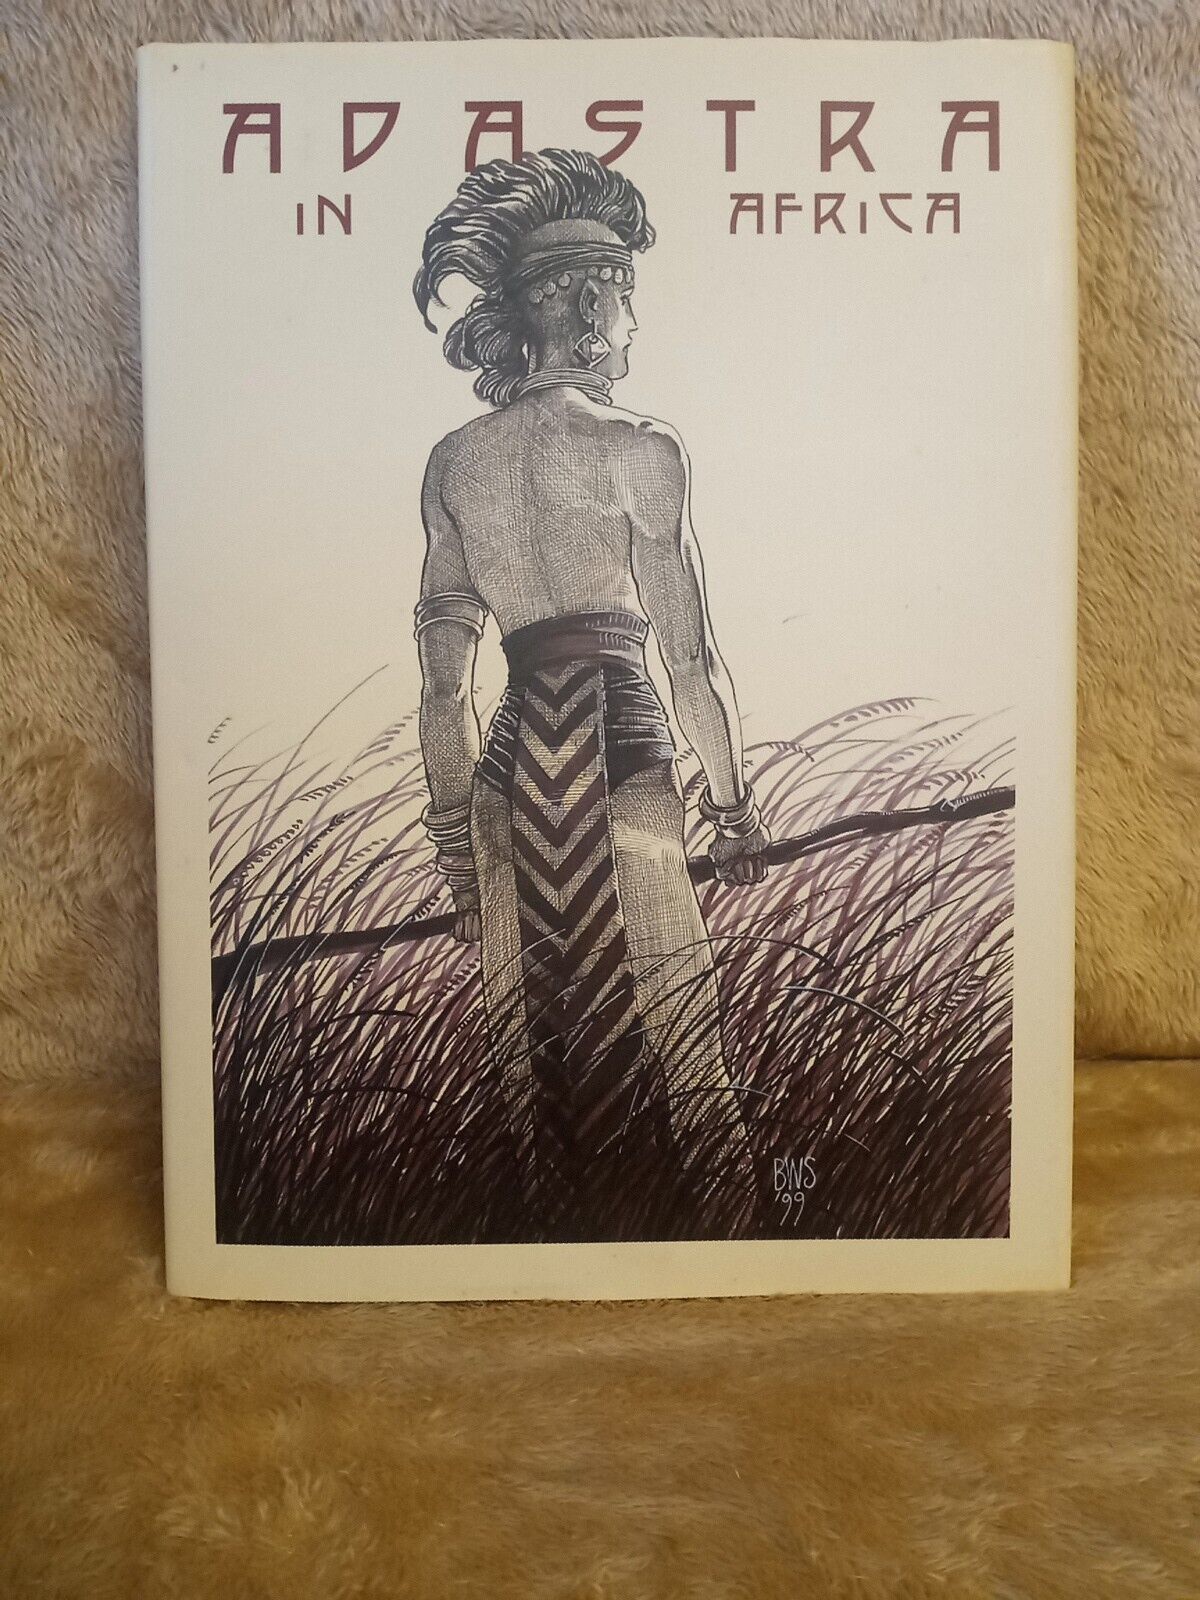 Adastra In Africa Hardcover by Barry Windsor Smith